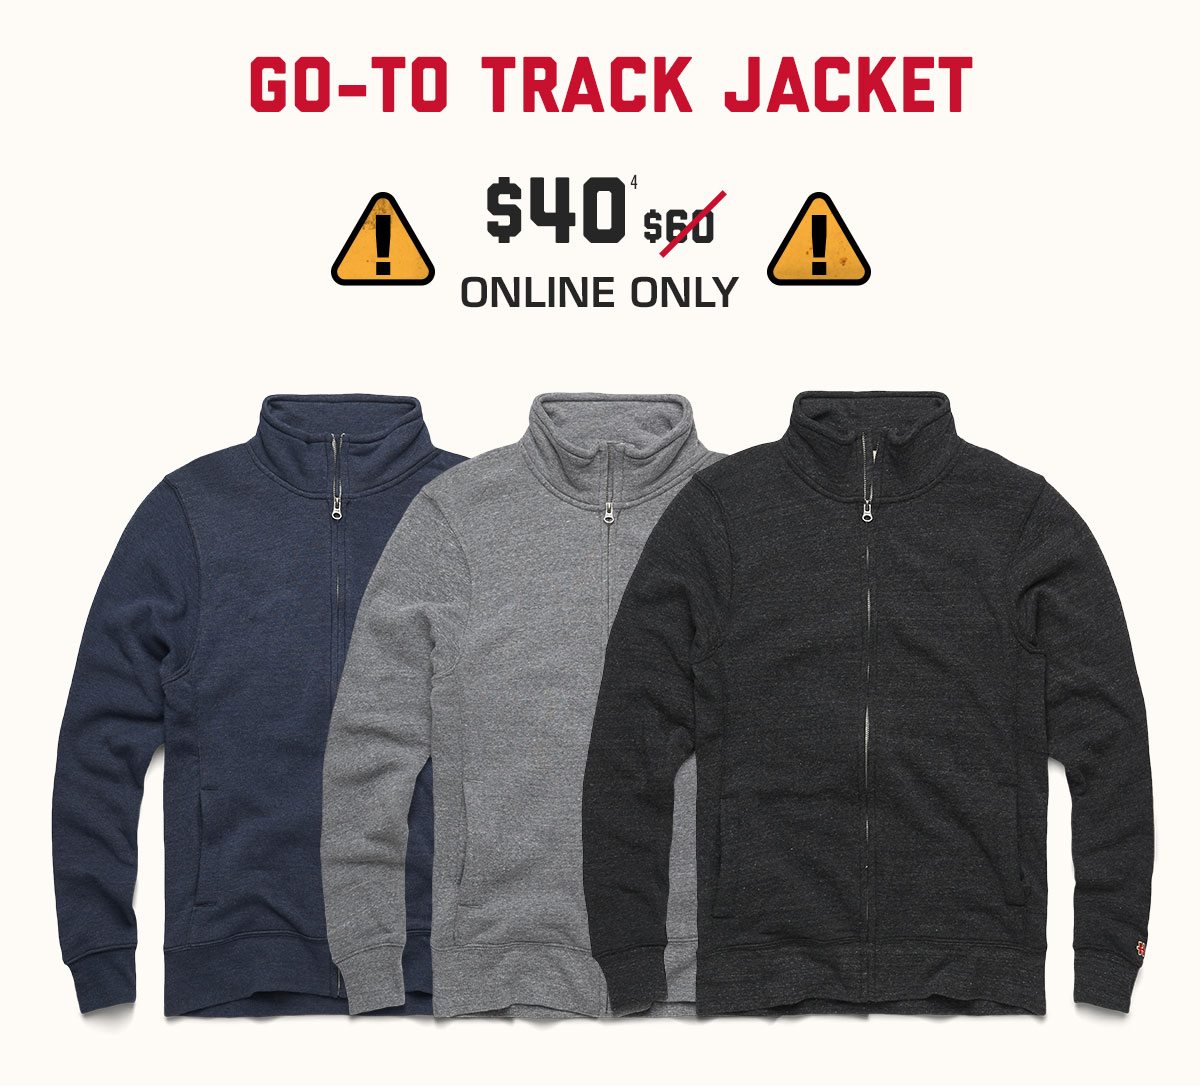 Go-To Track Jacket, $40* online only.